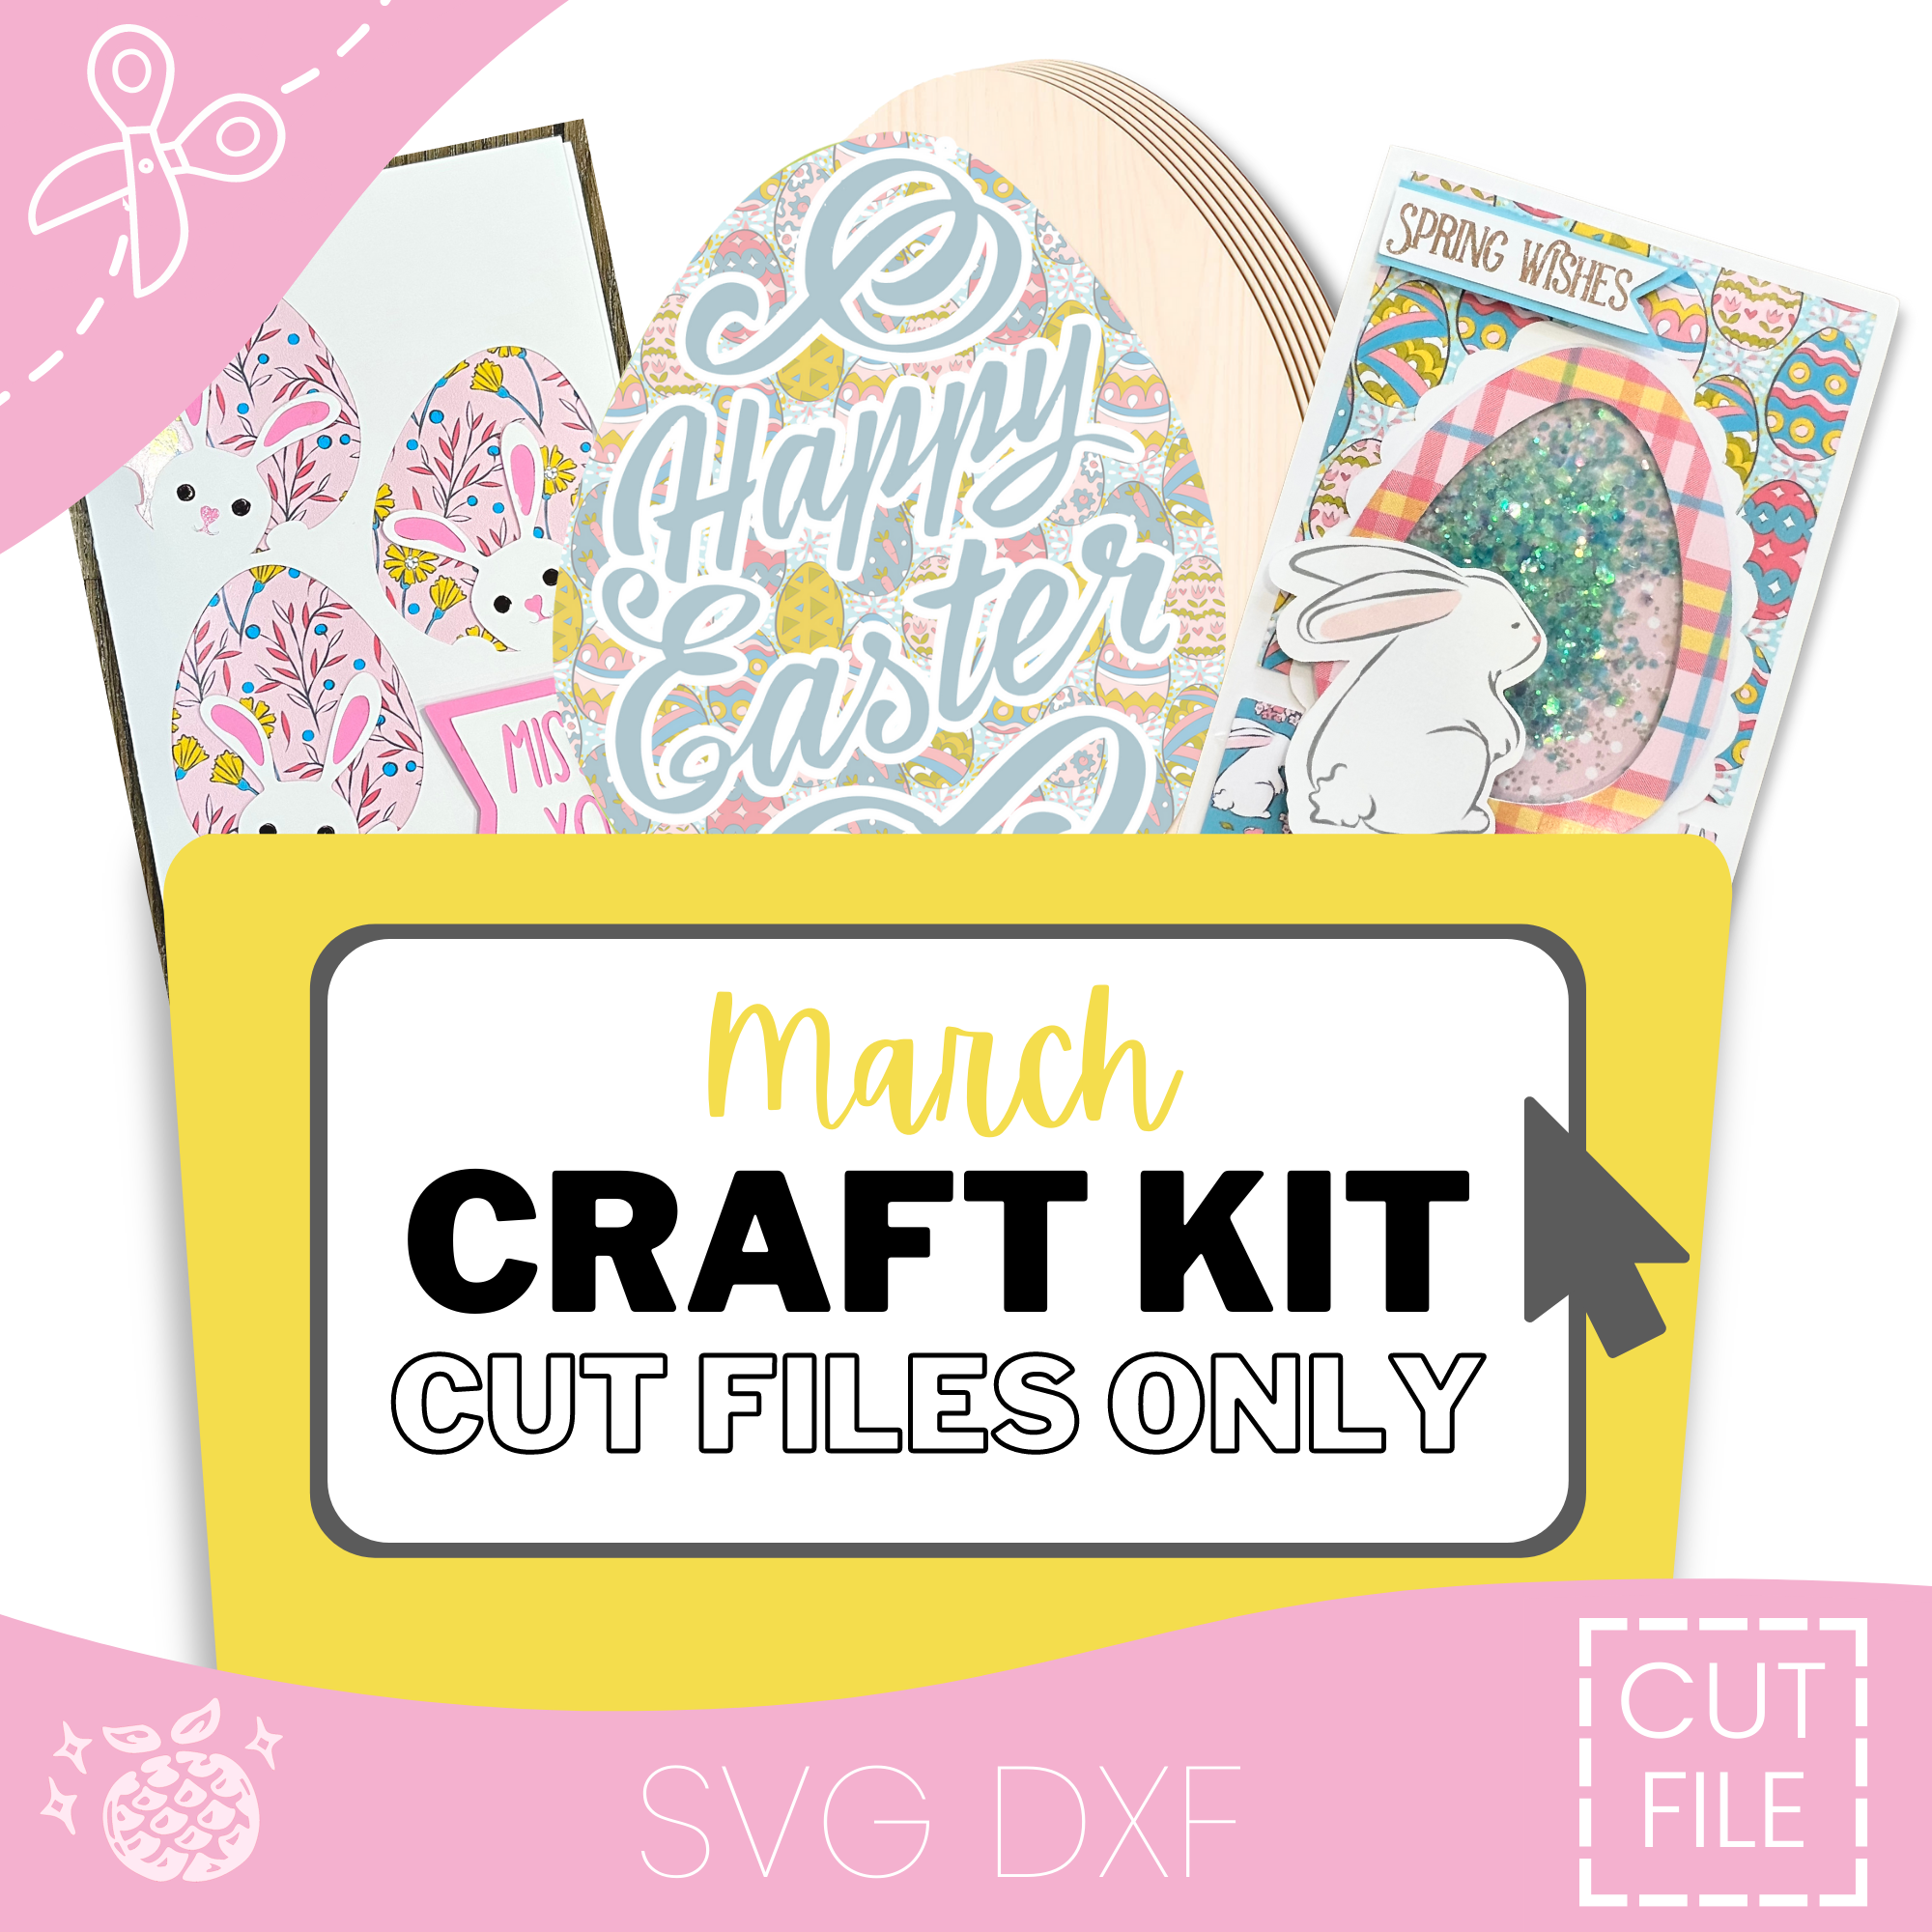 March "Craft Kit Cut Files Only" Option